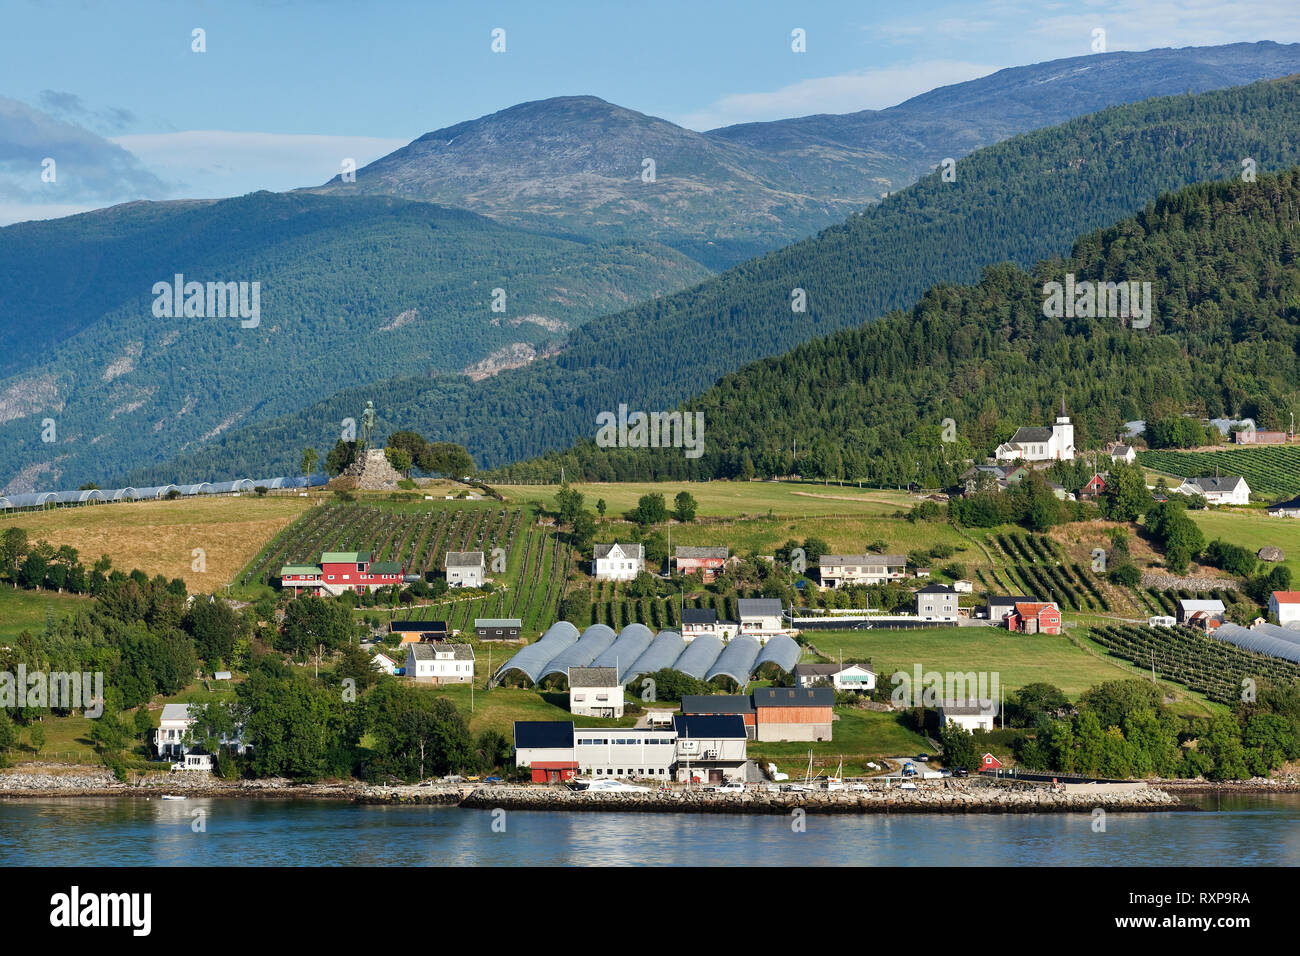 Village of Vangsnes and its many orchards on the banks of the Sognefjord, Norway Stock Photo